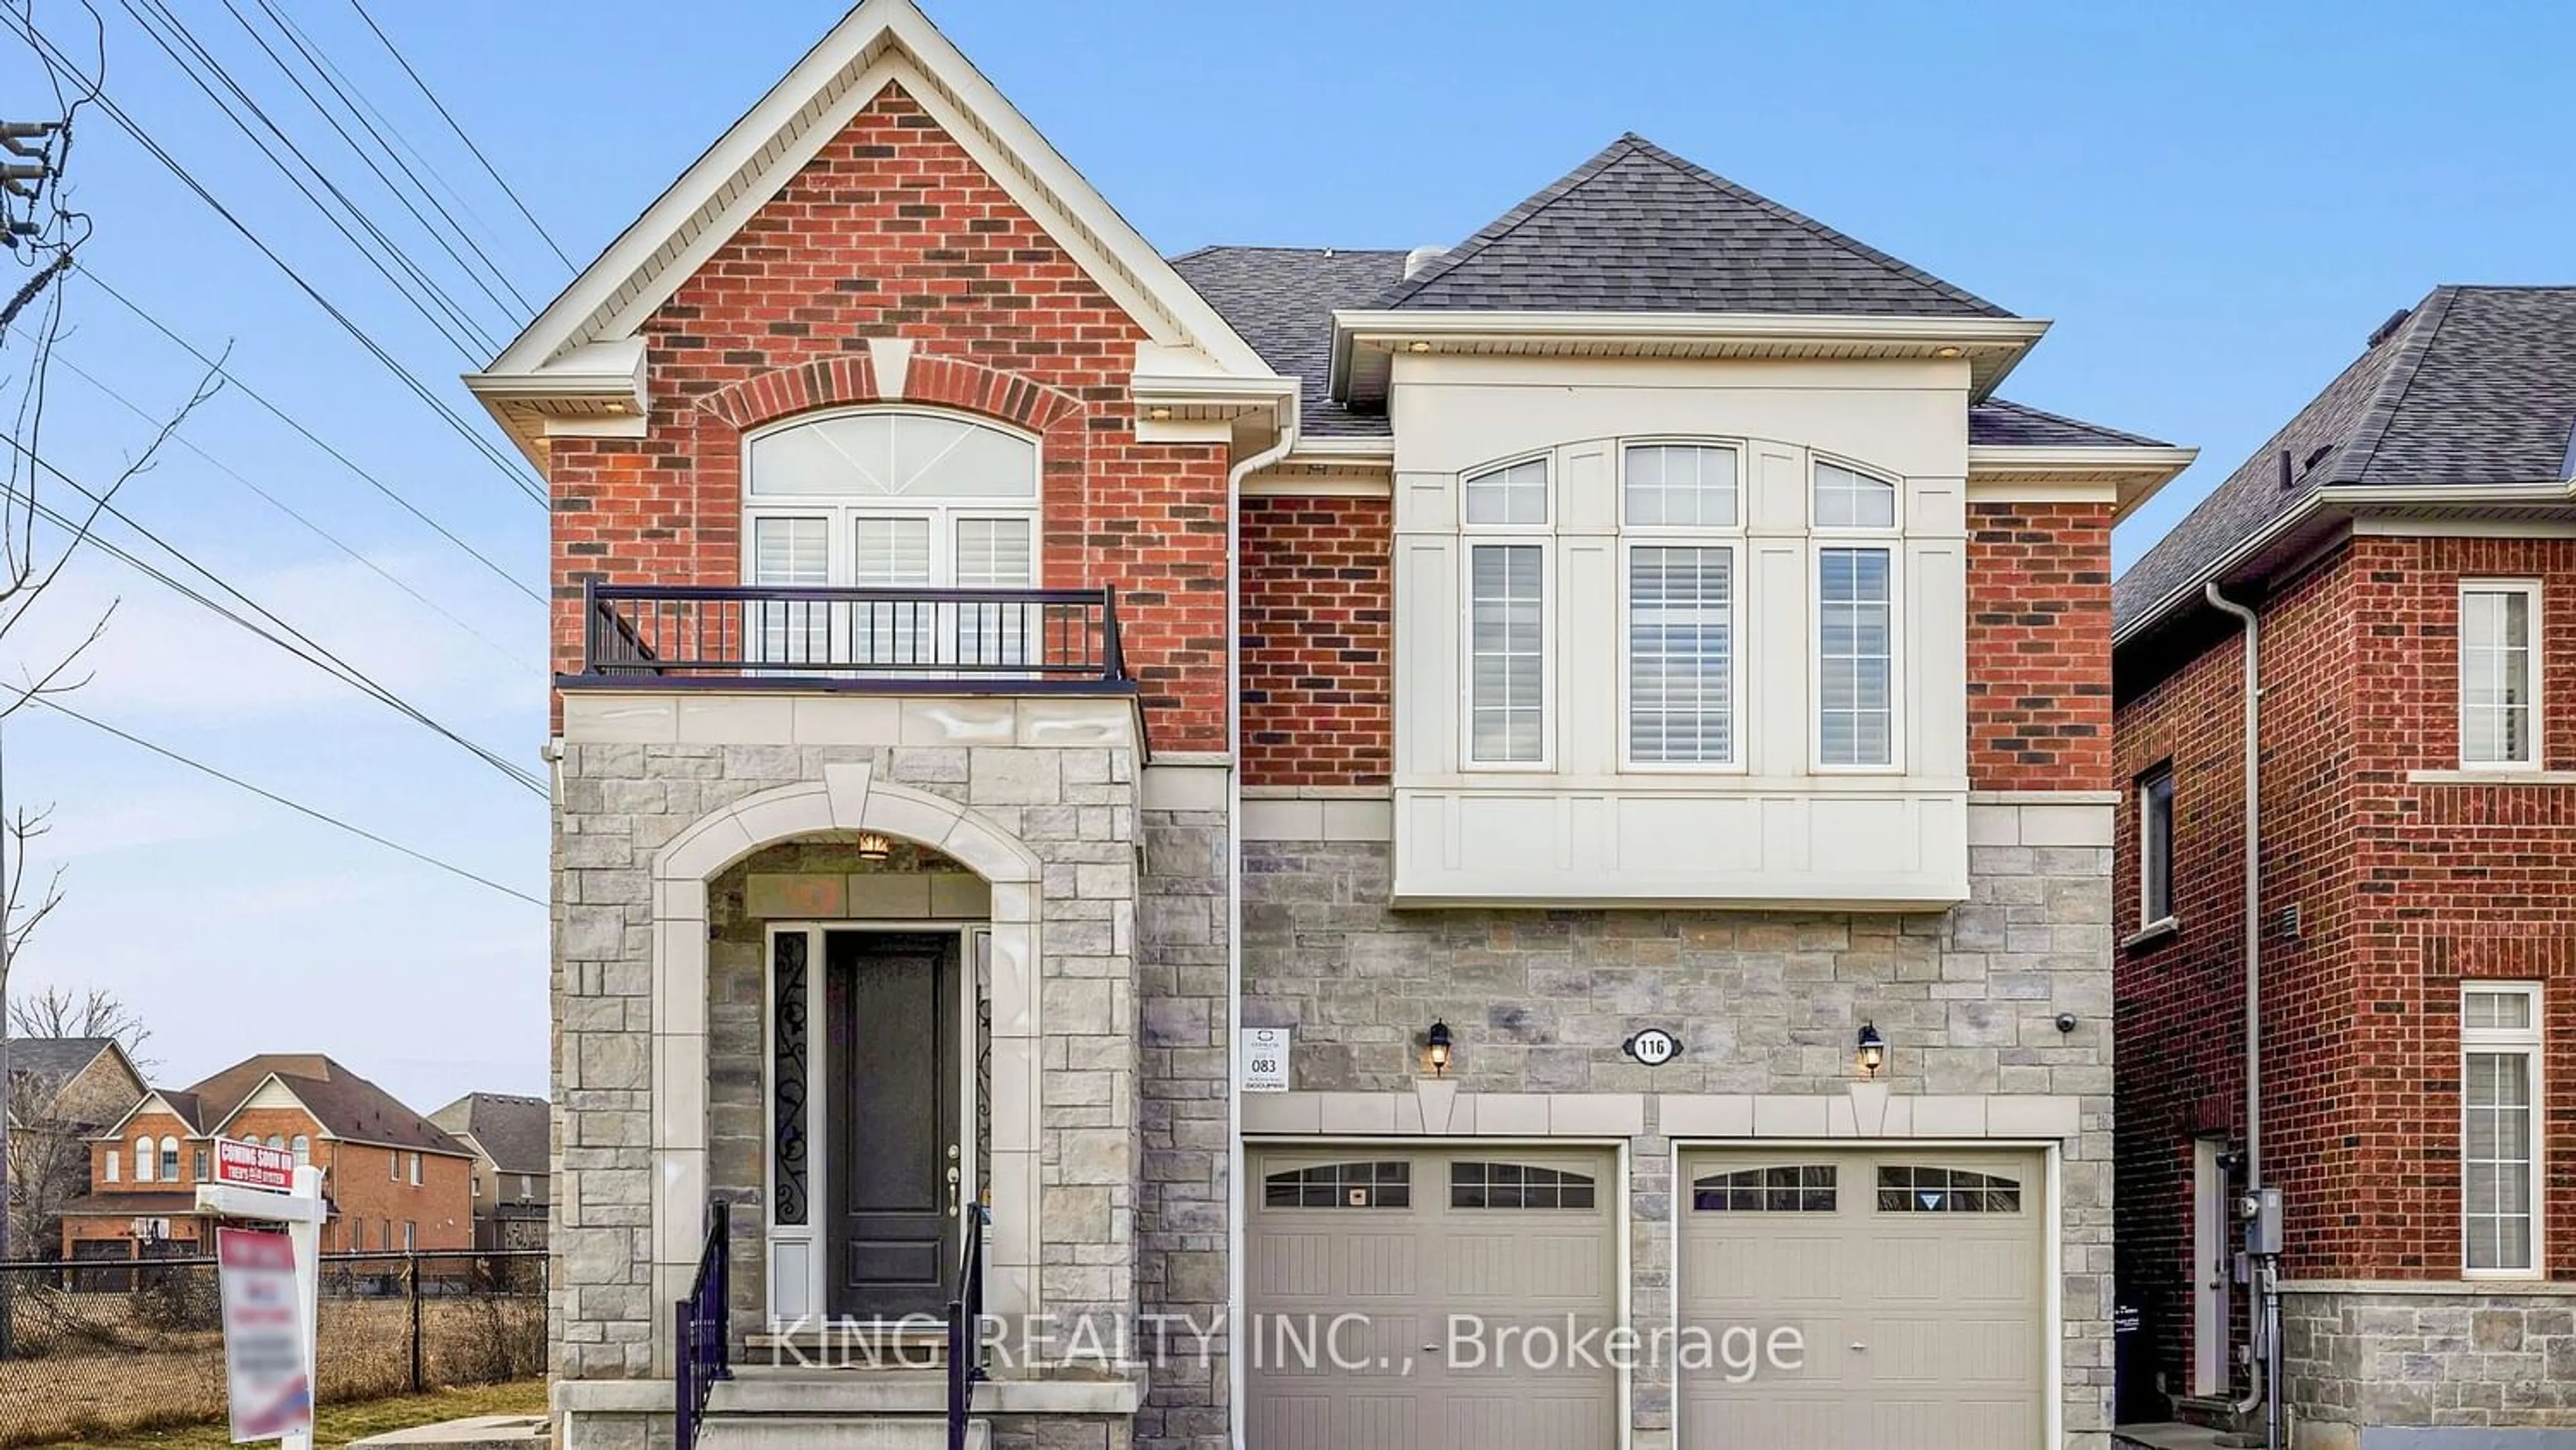 Home with brick exterior material for 116 Bonnie Braes Dr, Brampton Ontario L6Y 0W7